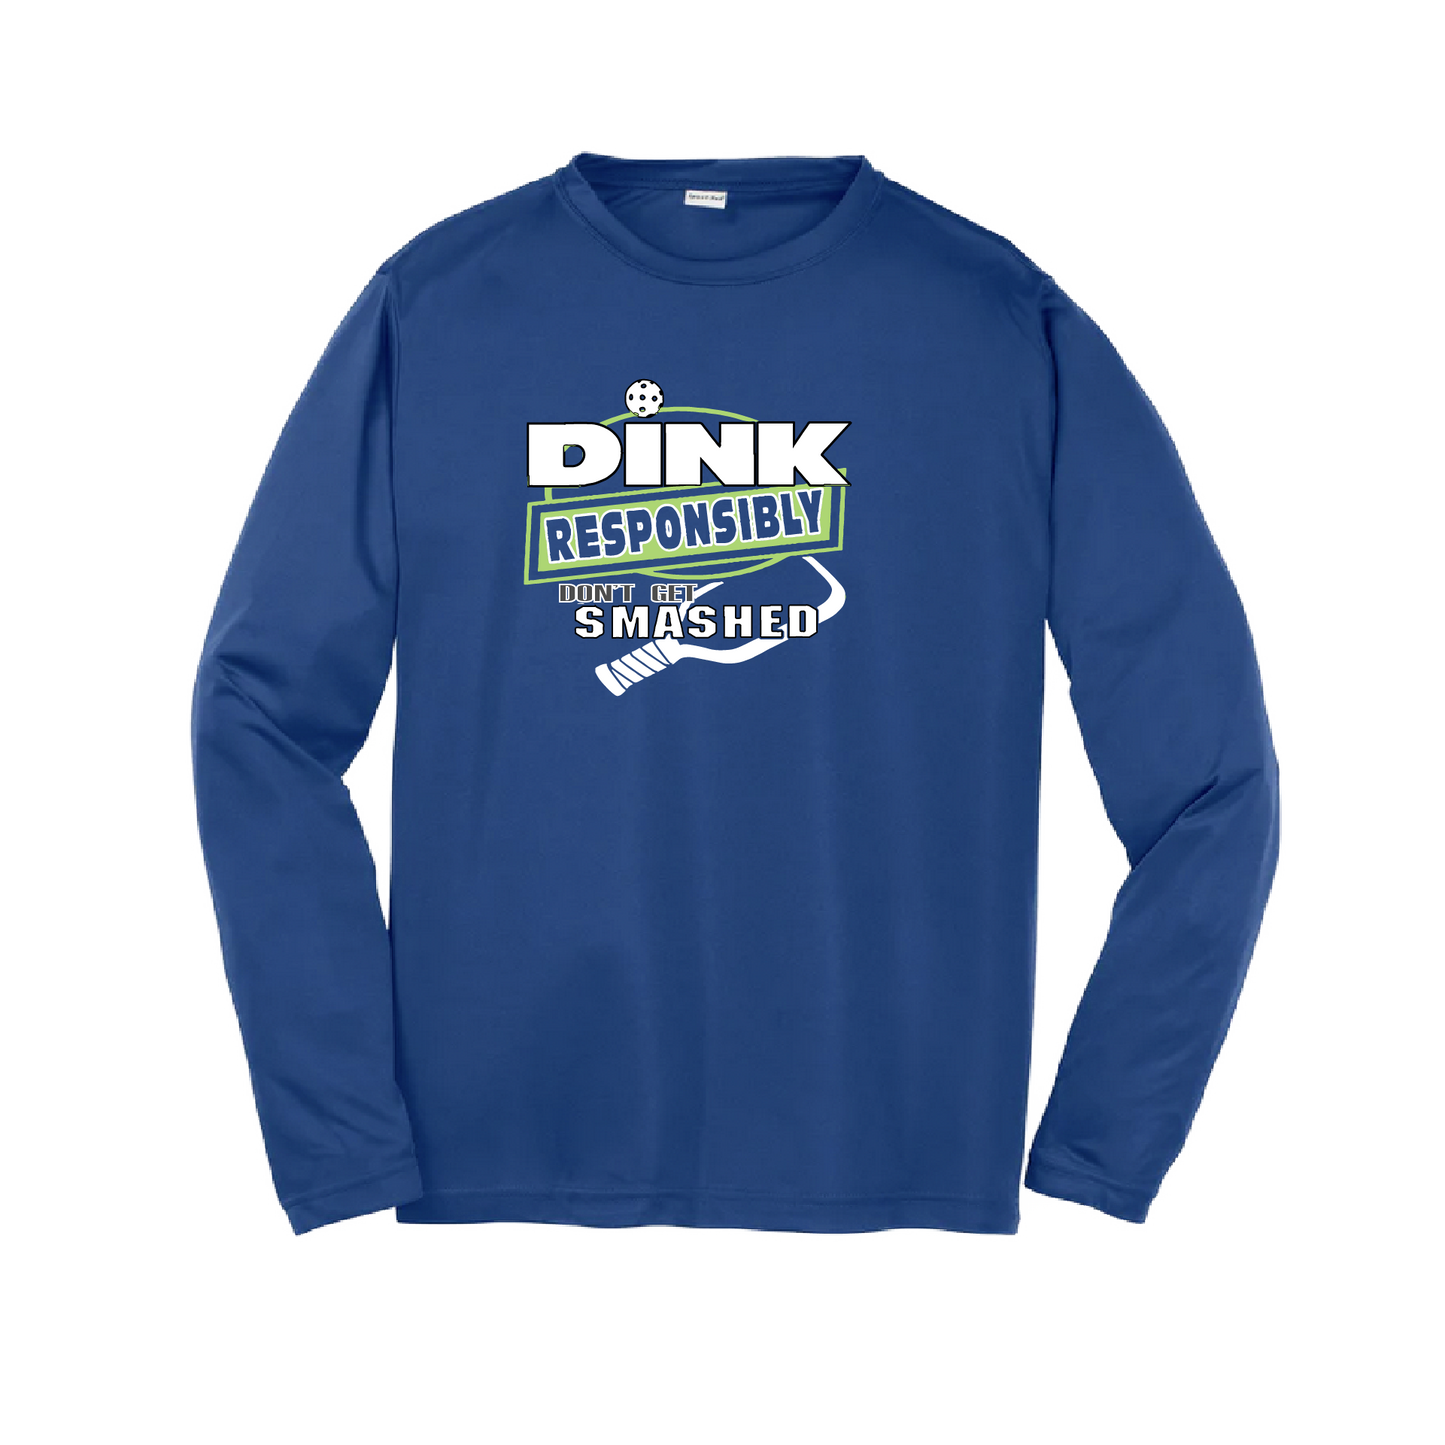 Pickleball Design: Dink Responsibly - Don't Get Smashed  Youth Style: Long Sleeve  Shirts are lightweight, roomy and highly breathable. These moisture-wicking shirts are designed for athletic performance. They feature PosiCharge technology to lock in color and prevent logos from fading. Removable tag and set-in sleeves for comfort.